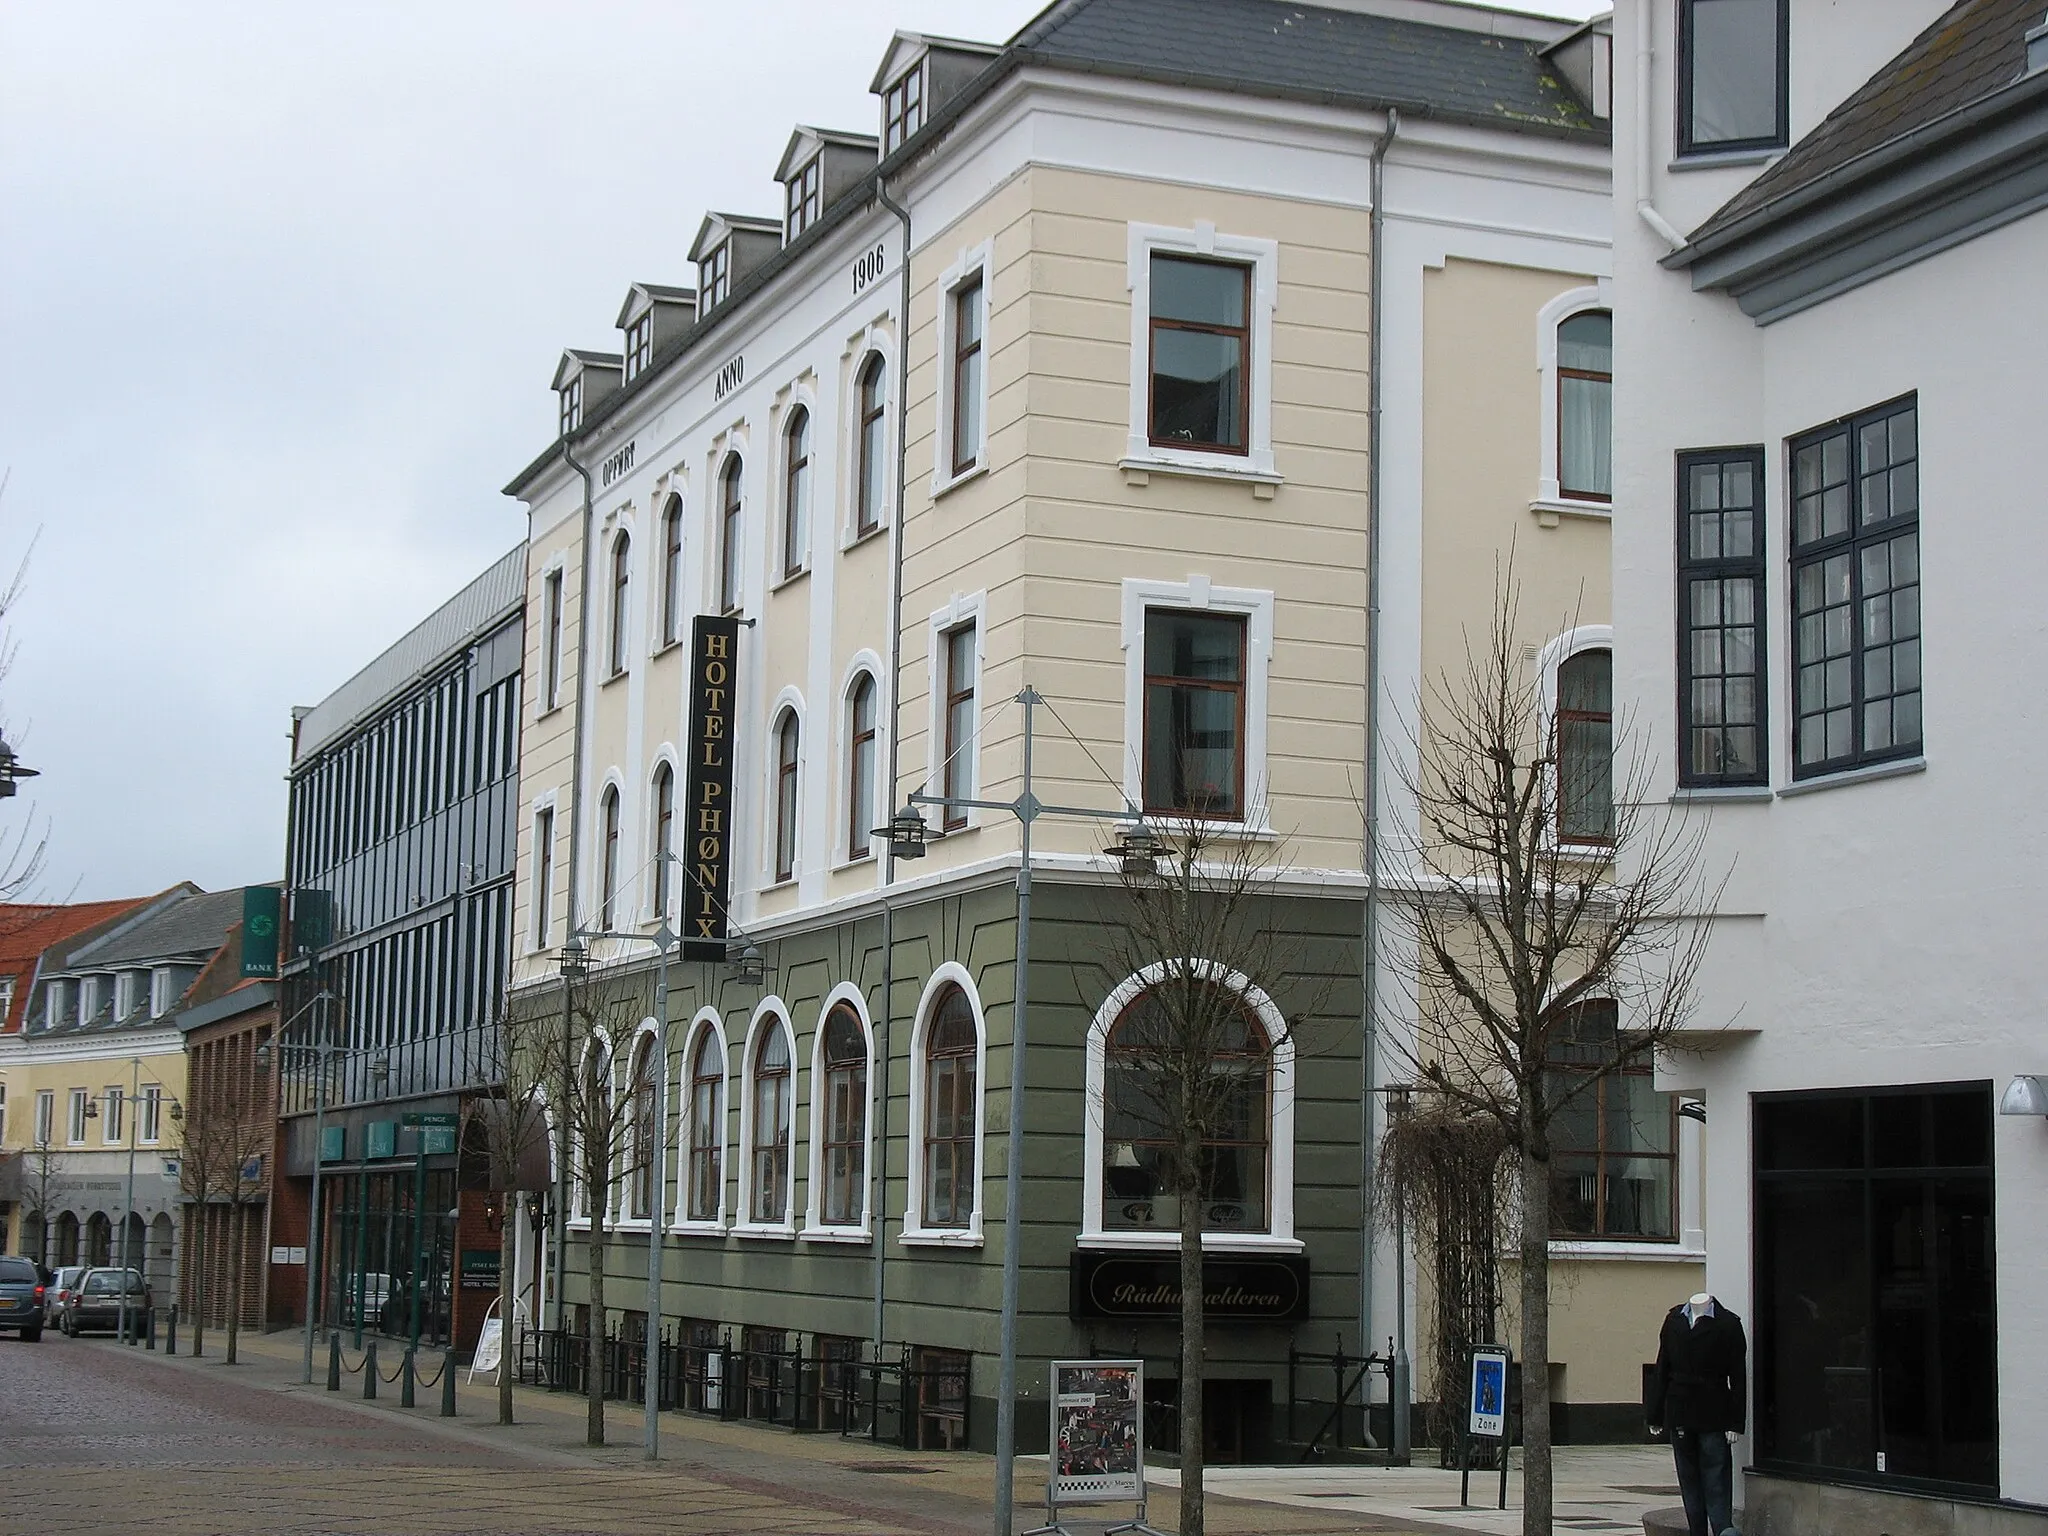 Photo showing: "Hotel Phønix" in the town "Brønderslev". The town is located in North Jutland, Denmark.